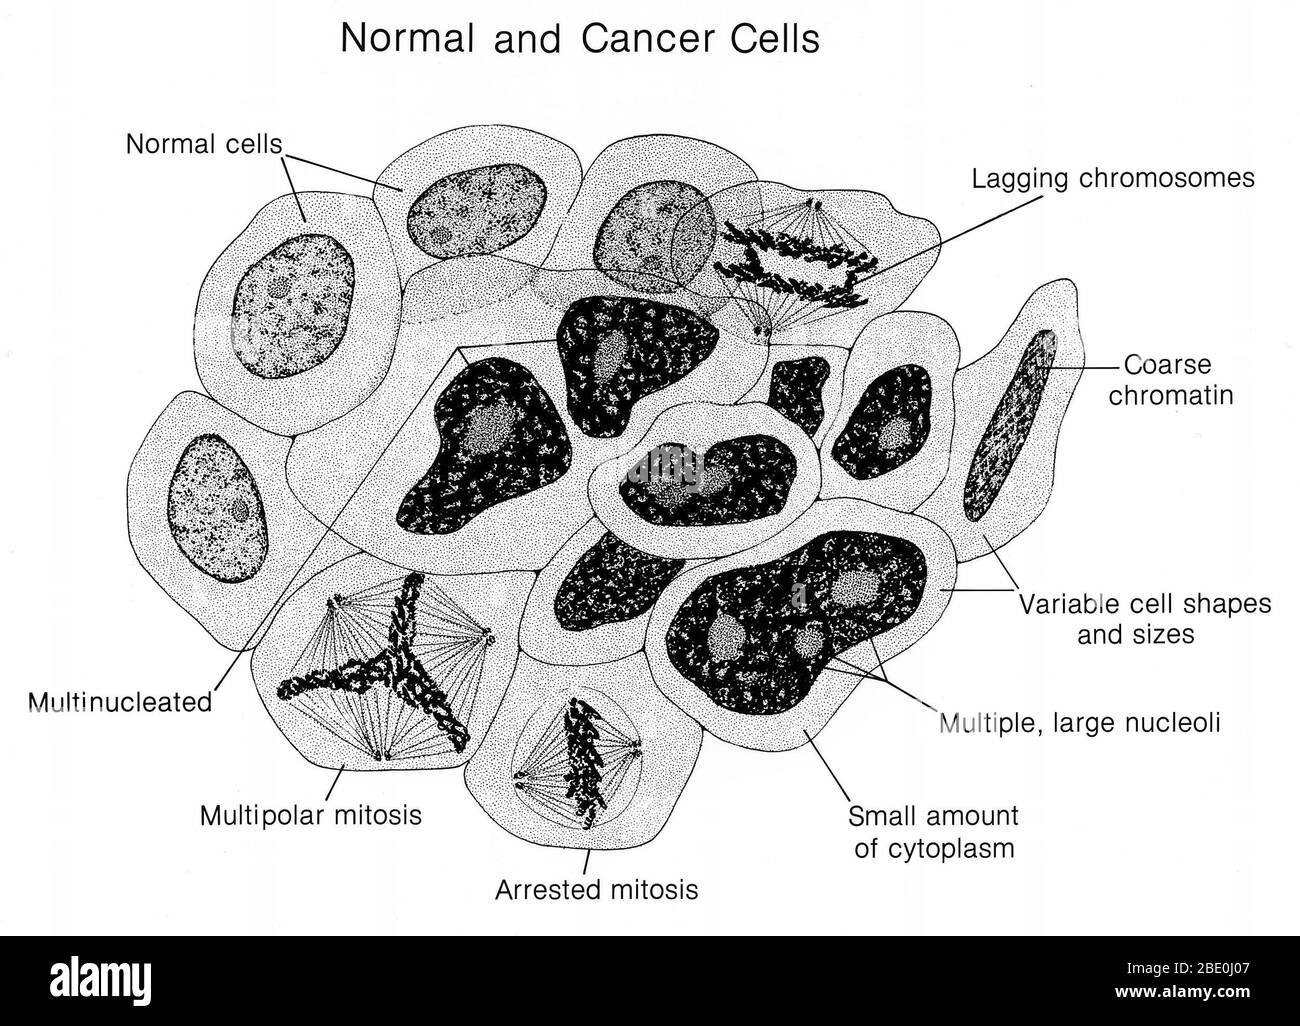 Illustration of normal and cancer cells side-by-side. The normal and cancerous characteristics are identified. Cancer also known as a malignant tumor or malignant neoplasm, is a group of diseases involving abnormal cell growth with the potential to invade or spread to other parts of the body. Not all tumors are cancerous; benign tumors do not spread to other parts of the body. Possible signs and symptoms include: a new lump, abnormal bleeding, a prolonged cough, unexplained weight loss, and a change in bowel movements among others. While these symptoms may indicate cancer, they may also occur Stock Photo